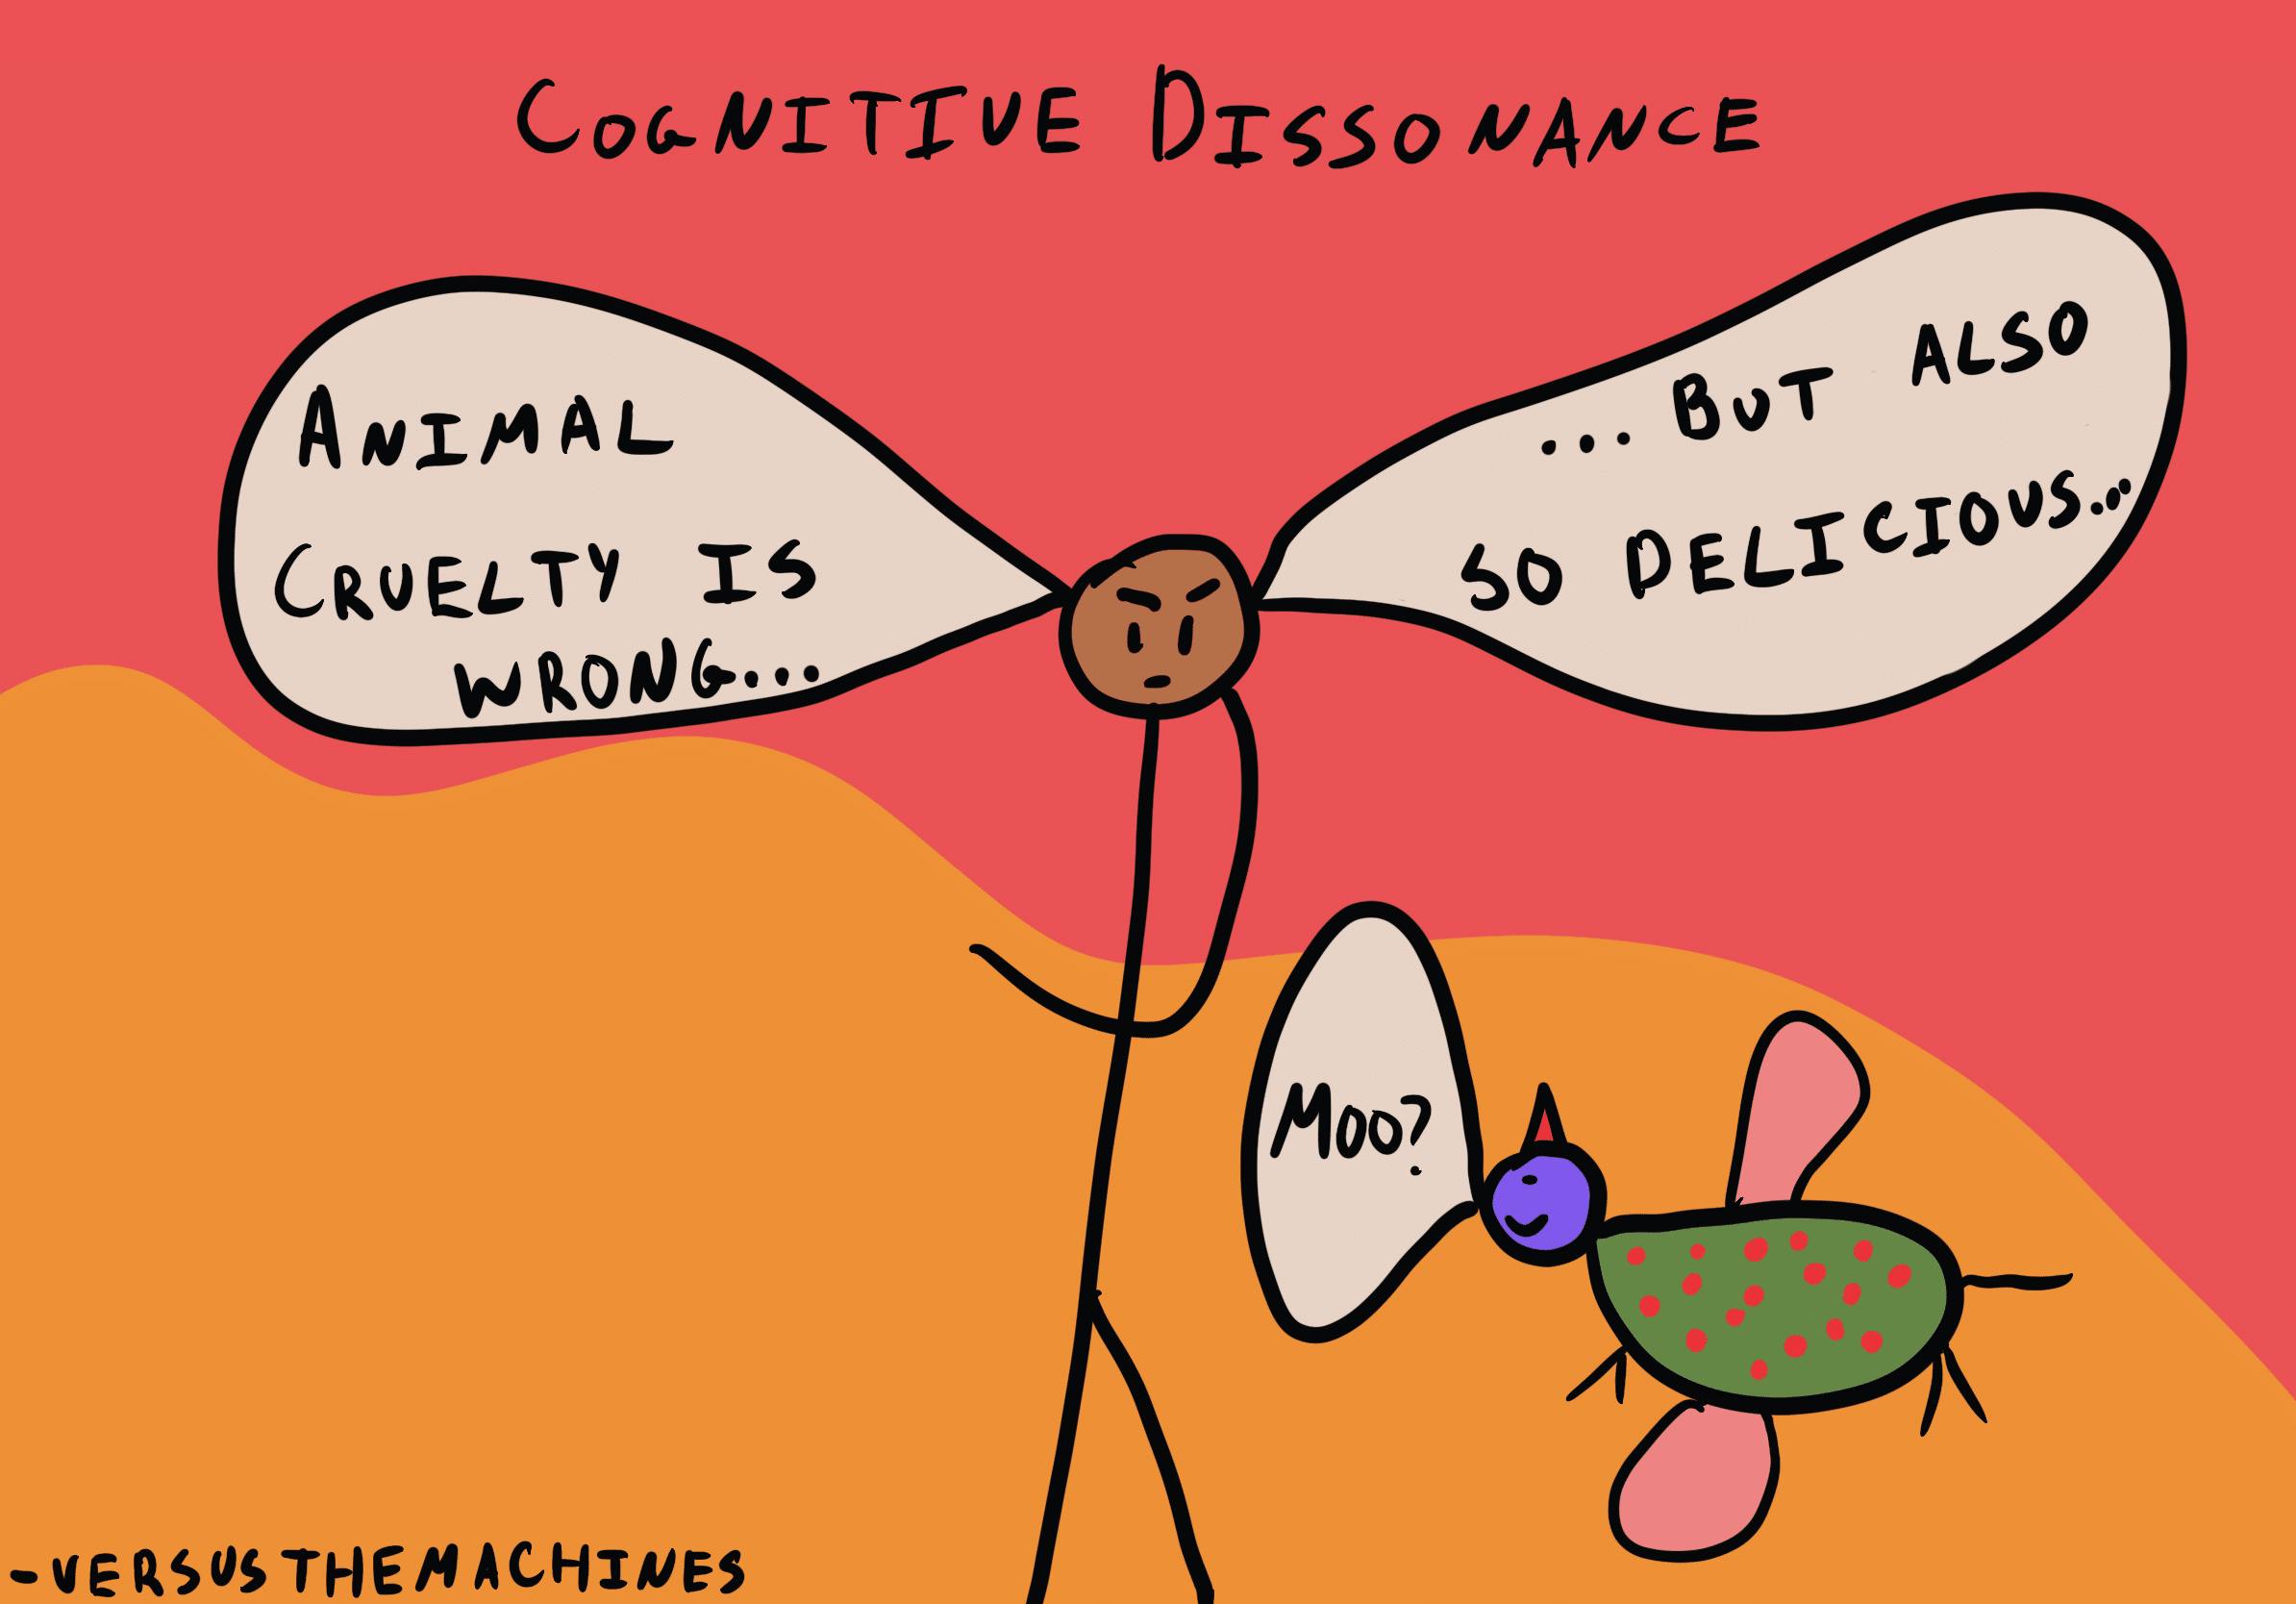 What Is Cognitive Dissonance? Definition and Examples